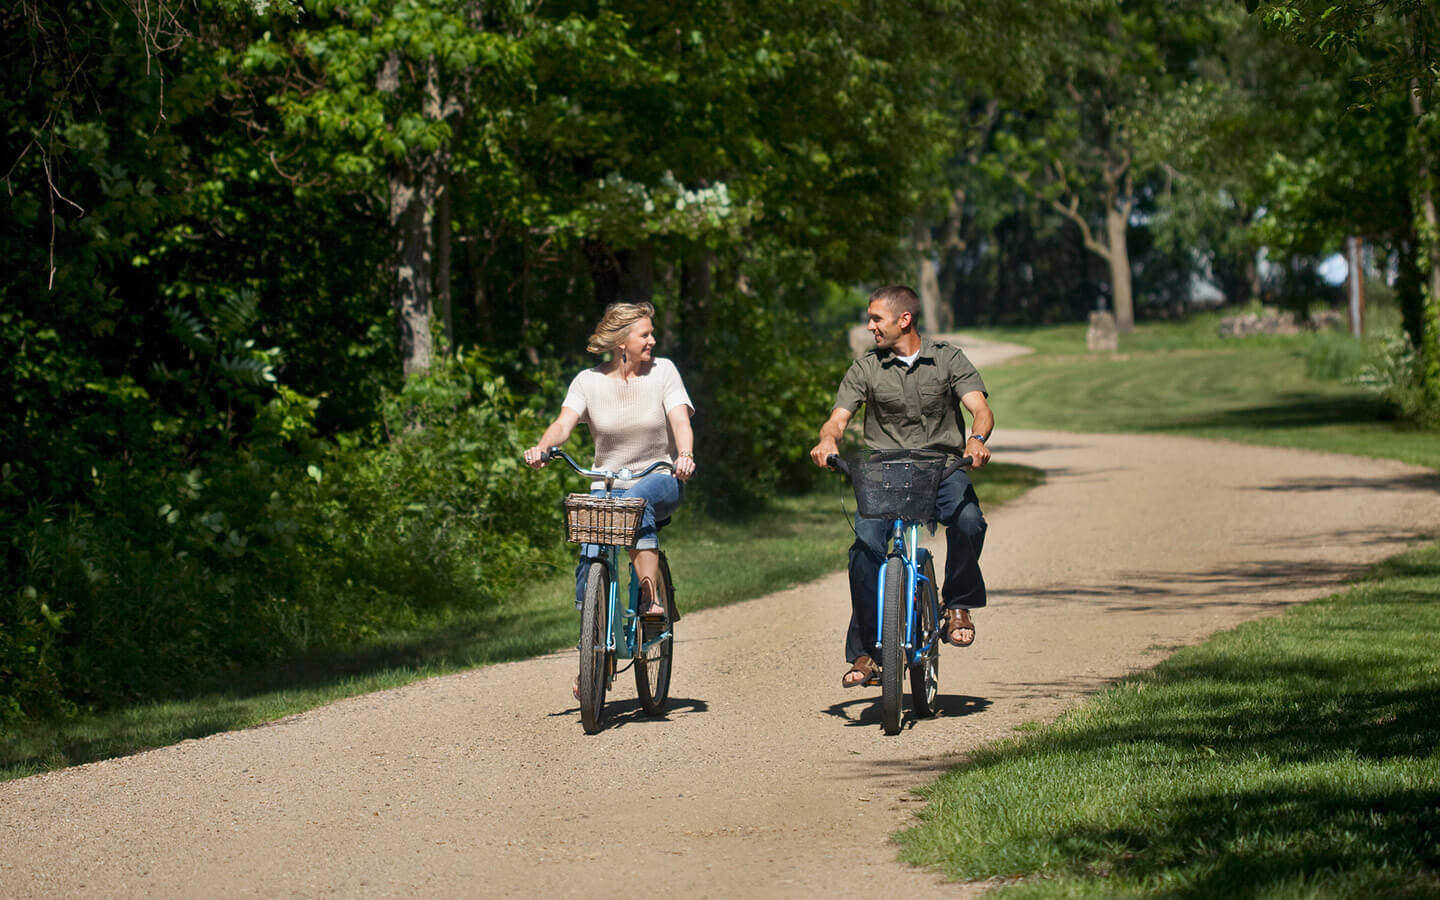 Couple riding bikes on a dirt path